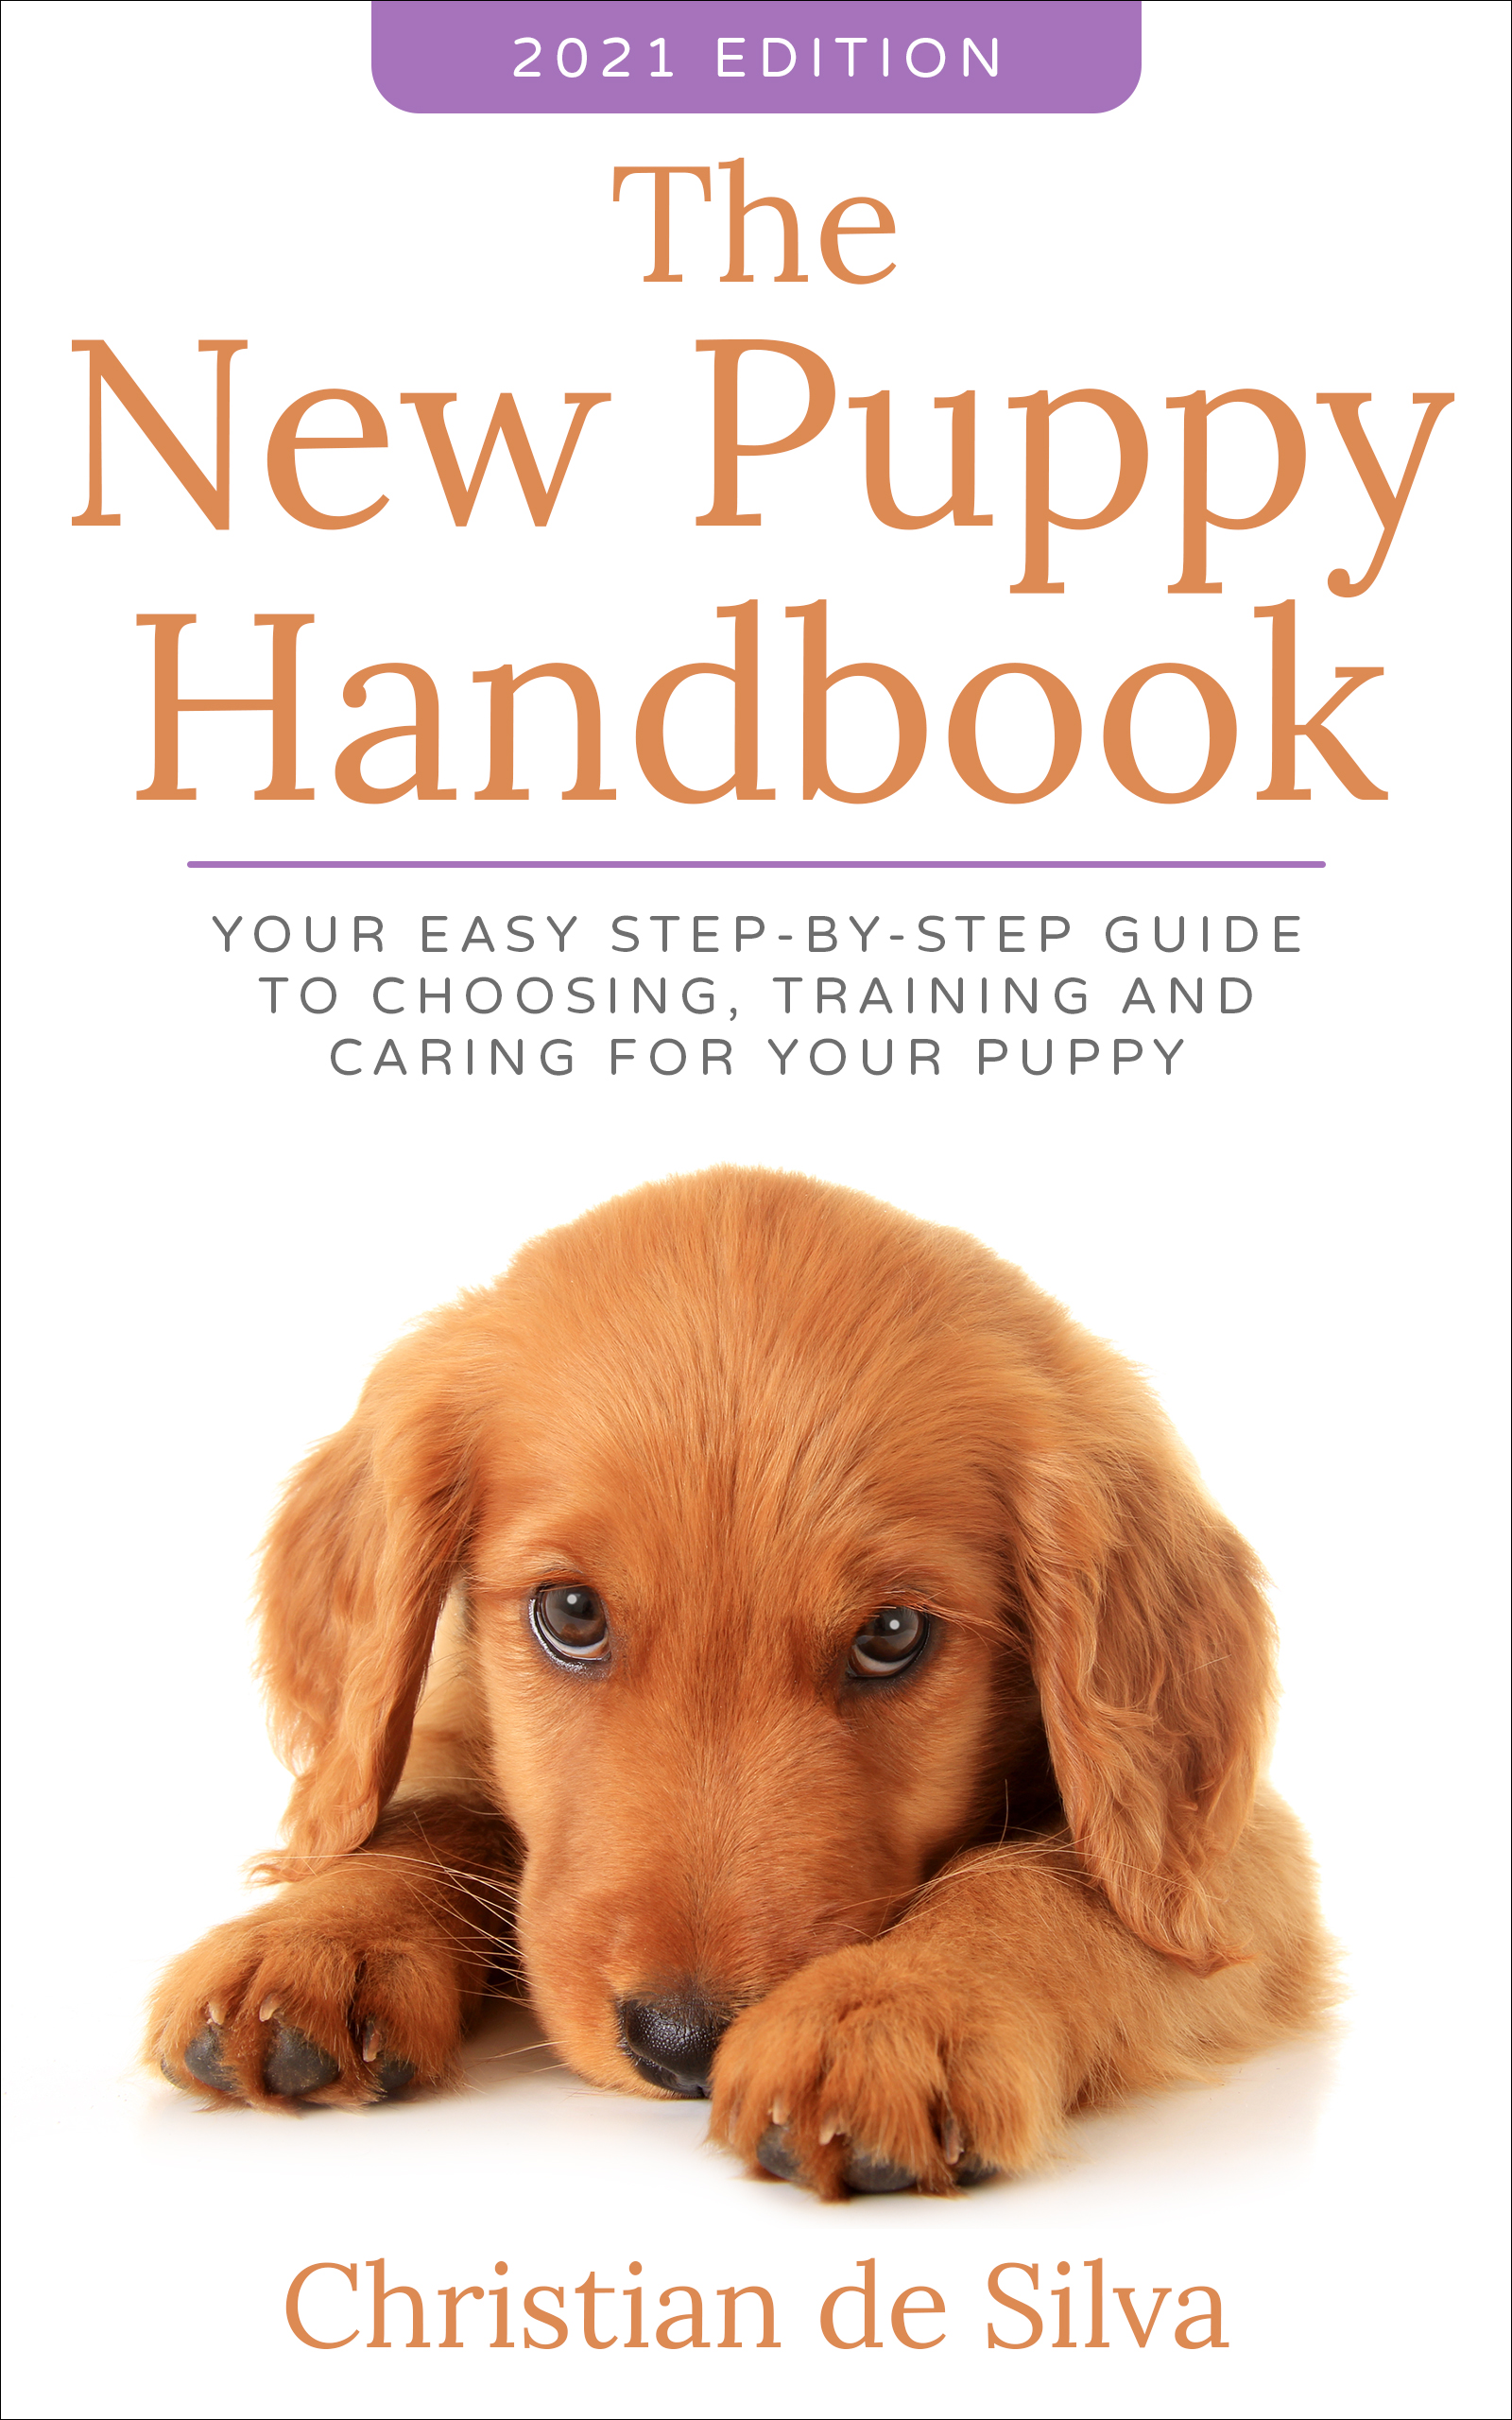 FREE: The New Puppy Handbook: Your Easy Step-By-Step Guide to Choosing, Training and Caring for Your Puppy by Christian de Silva